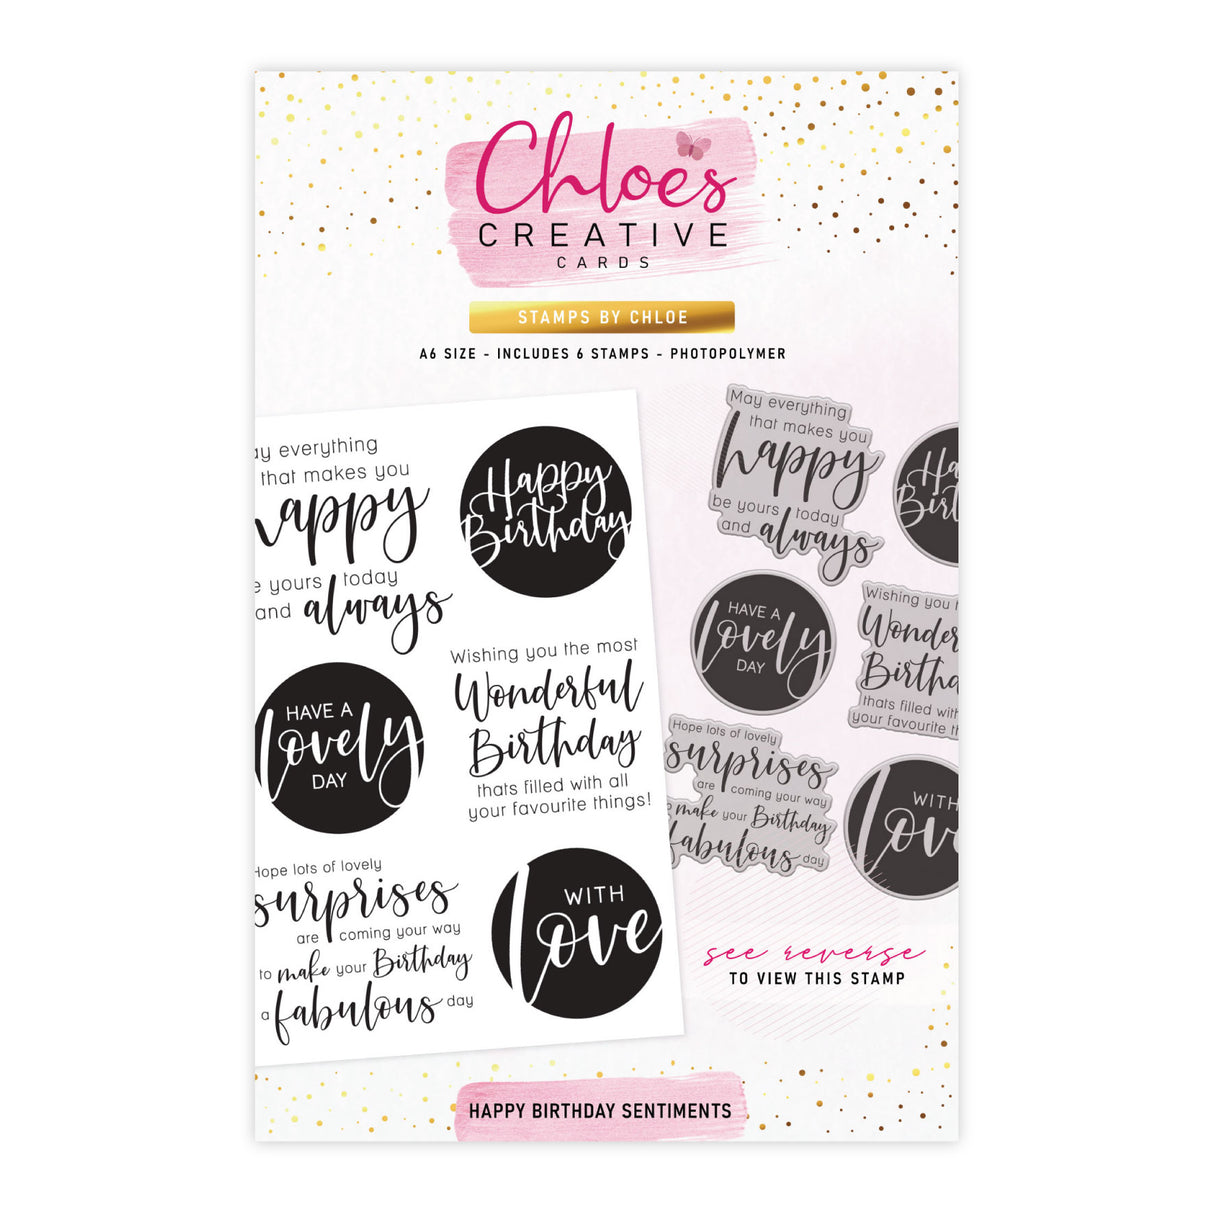 Chloes Creative Cards Photopolymer Stamp Set (A6) -  Happy Birthday Sentiments